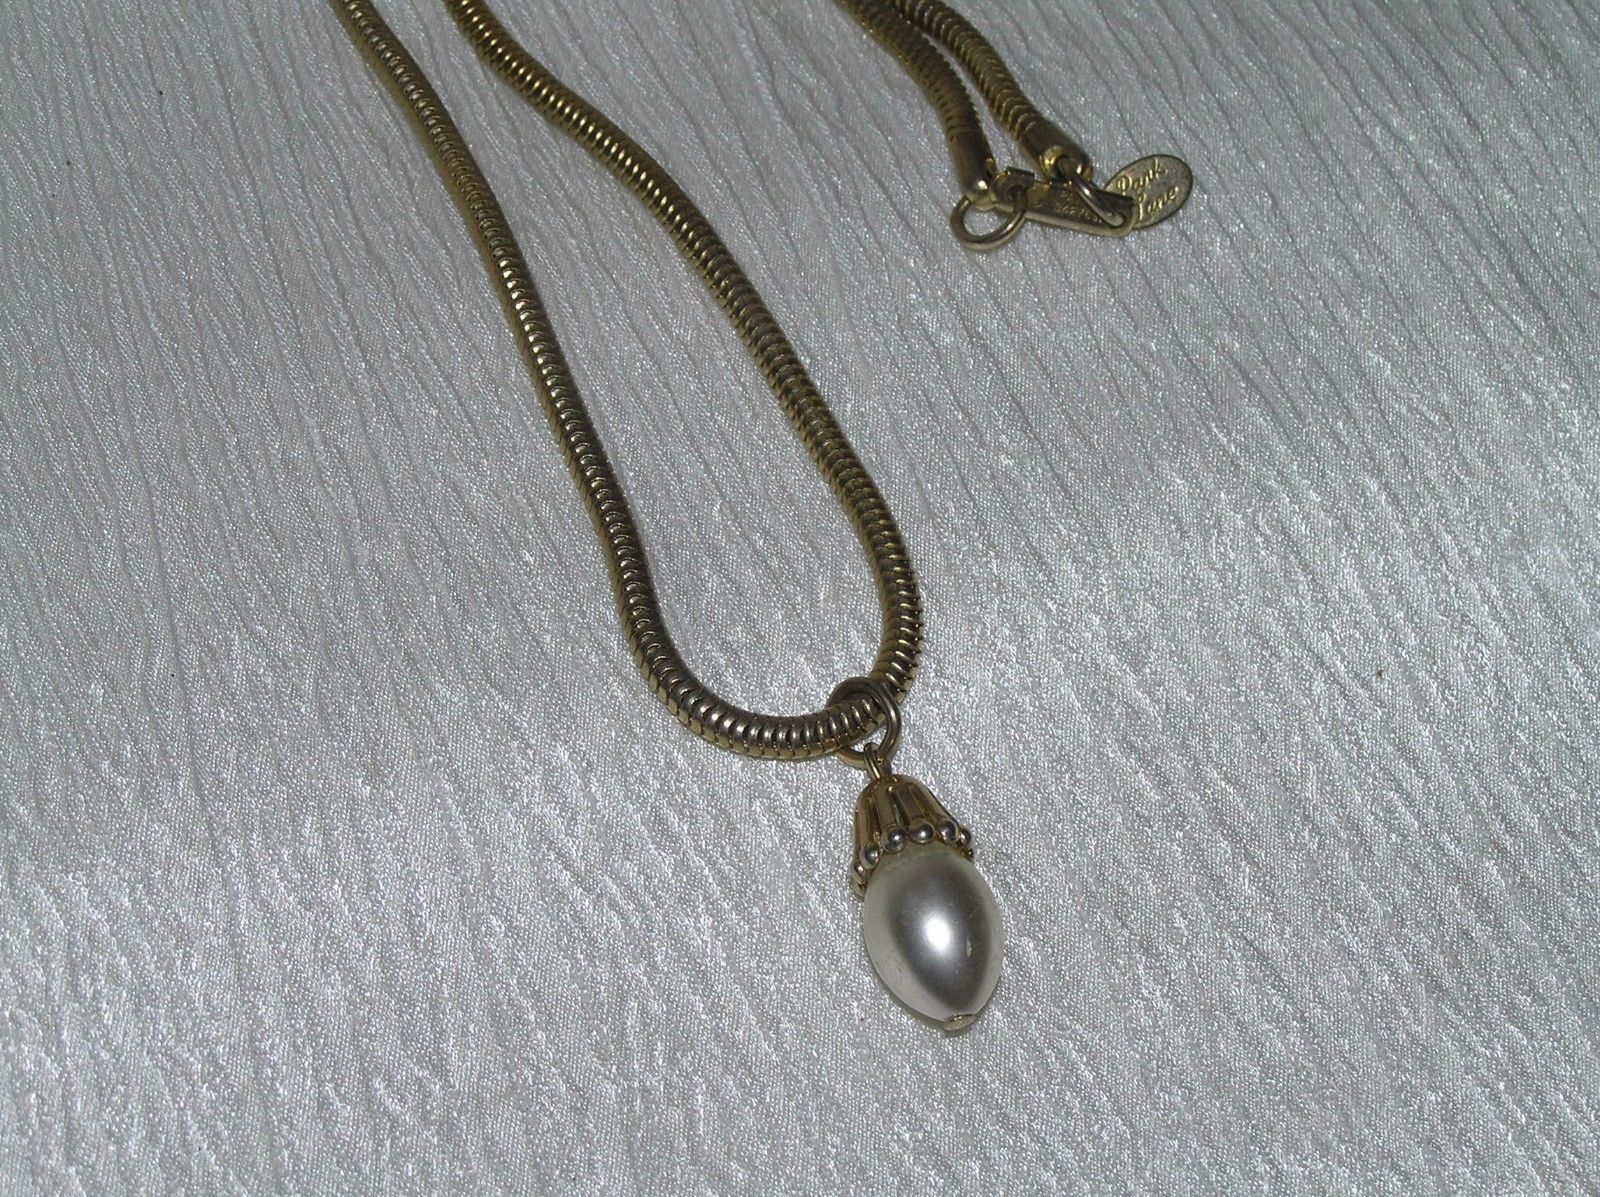 Vintage Park Lane Signed Goldtone Tubular Snake Chain with Classy Capped Faux - $8.59